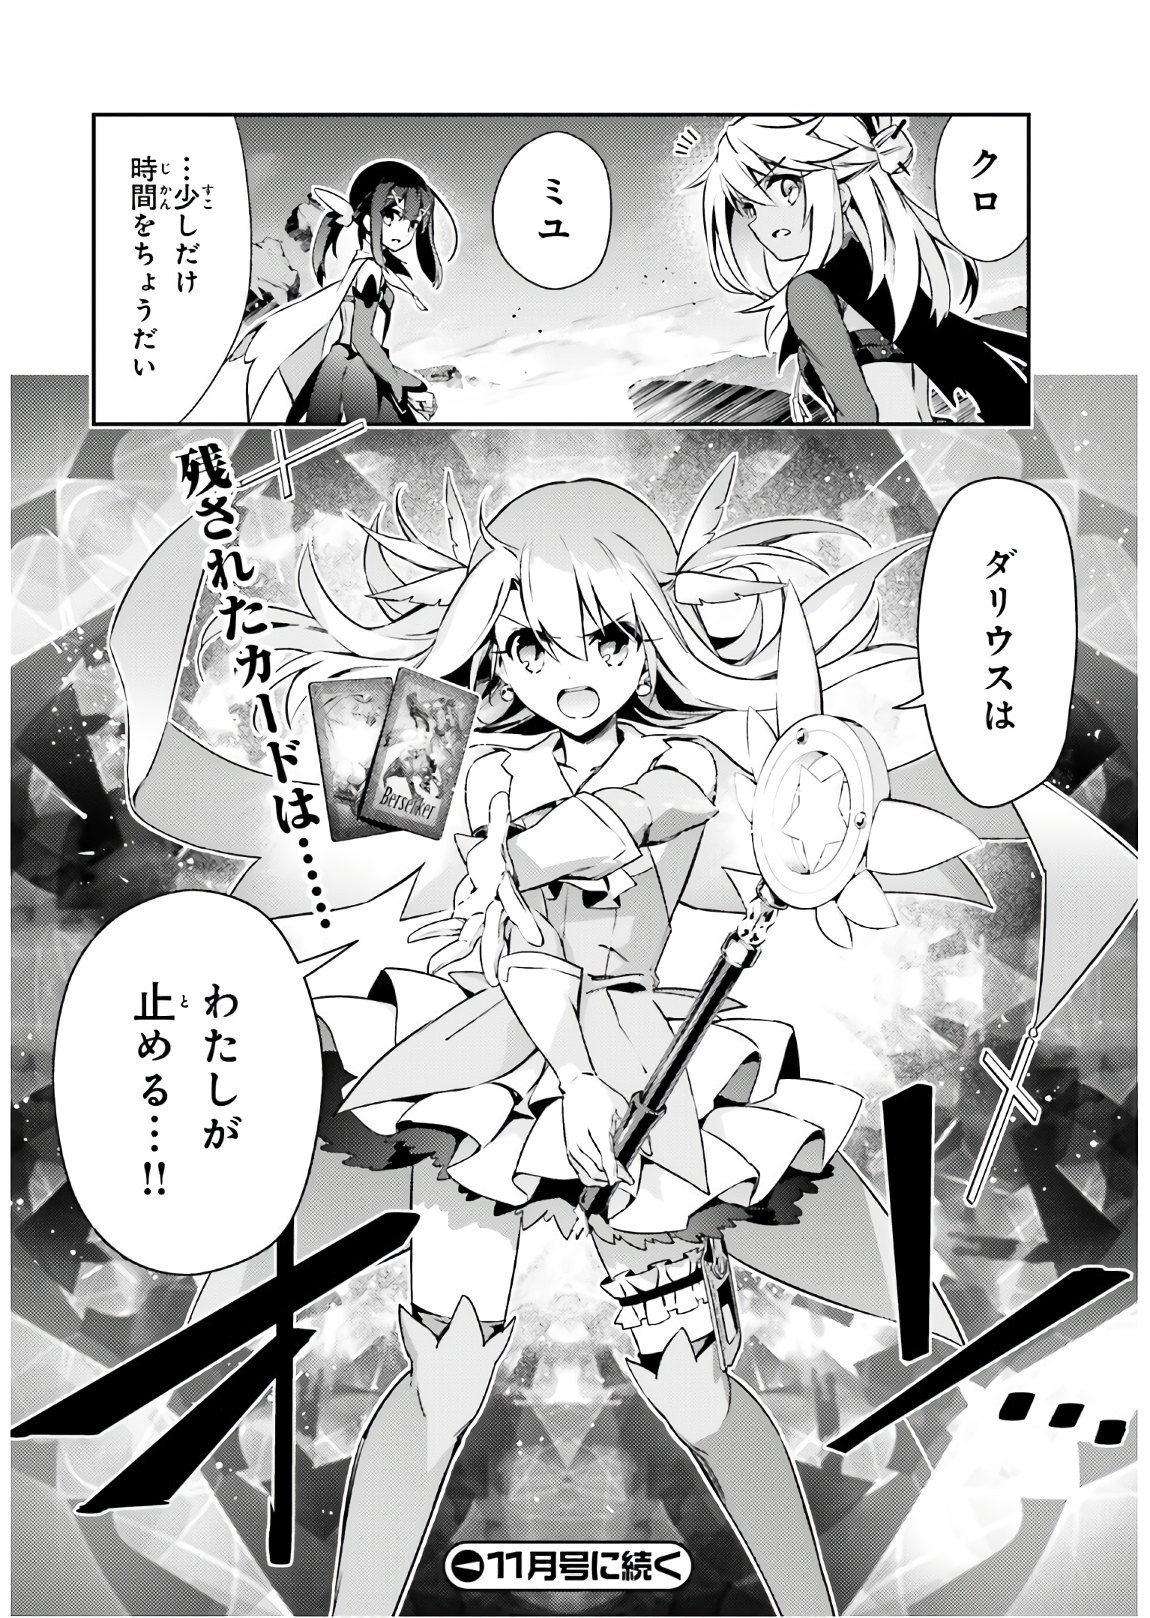 Fate/Kaleid Liner Prisma Illya Drei! - Chapter 58-2 - Page 14